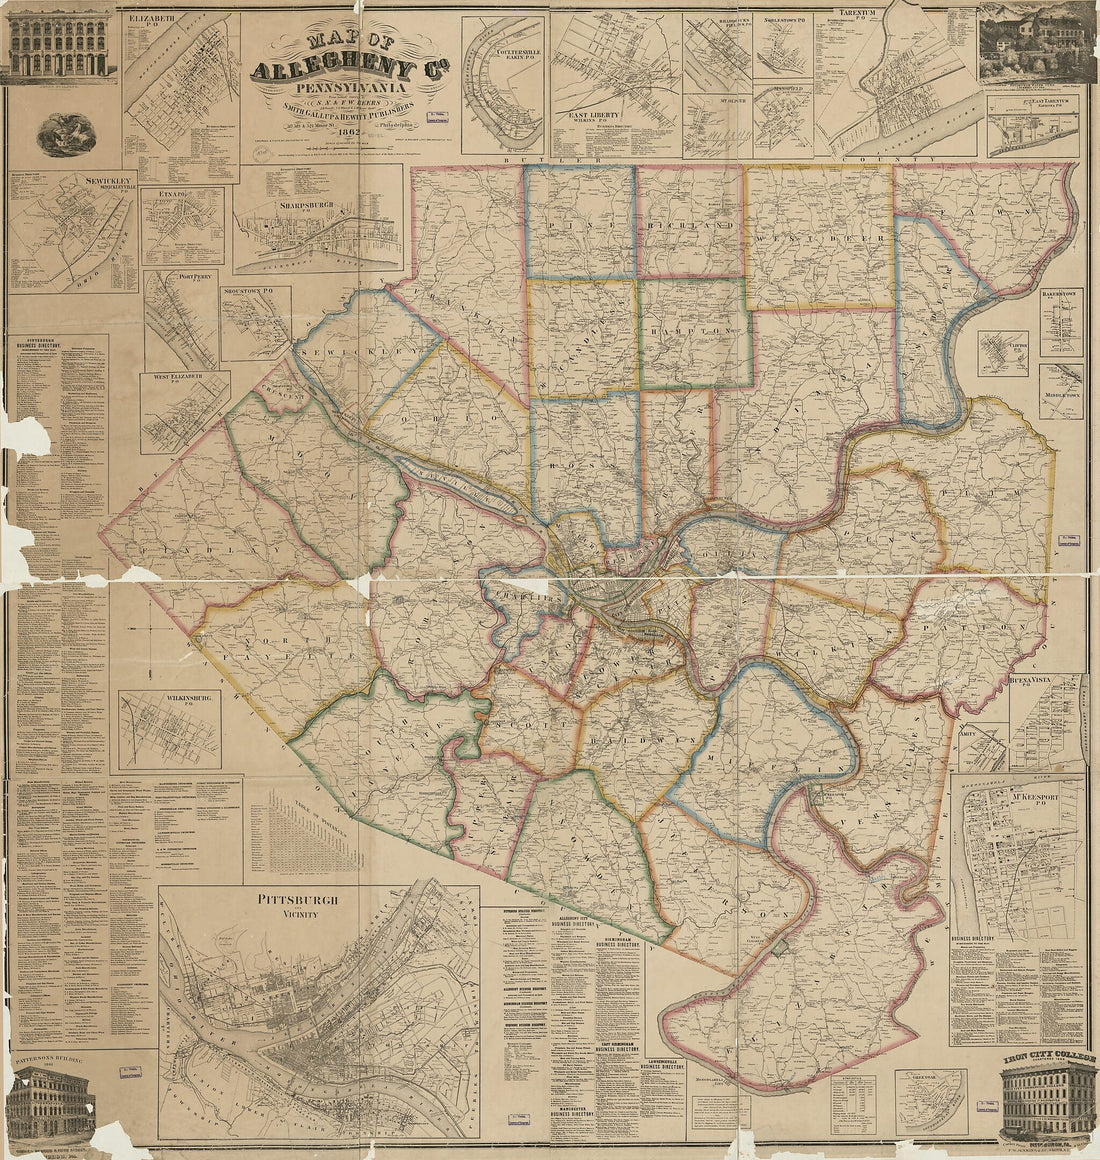 This old map of Map of Allegheny County, Pennsylvania : from Actual Surveys from 1862 was created by F. W. (Frederick W.) Beers, S. N. Beers,  F. Bourquin &amp; Co, A. B. Prindle, Gallup &amp; Hewitt Smith,  Worley &amp; Bracher in 1862